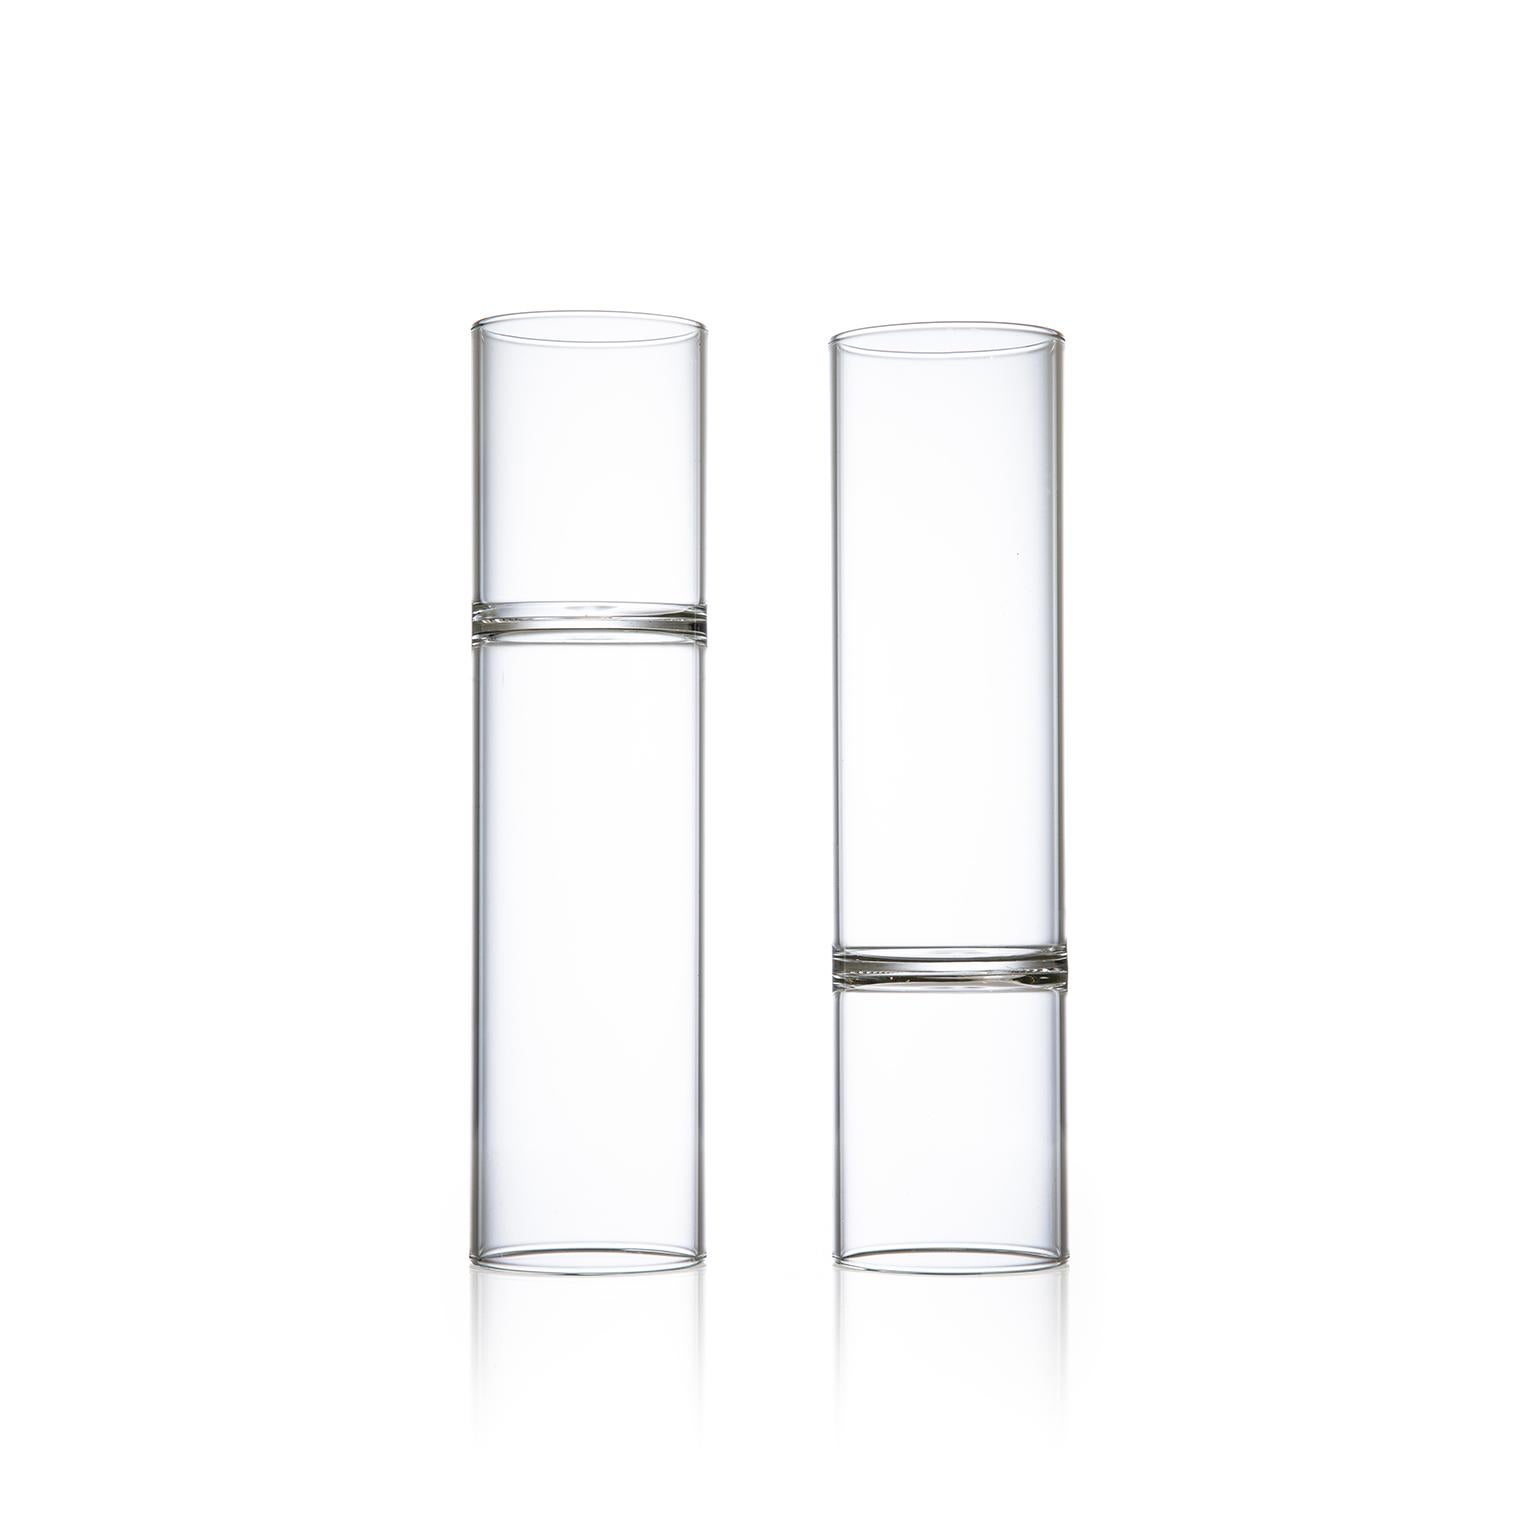 This set includes two clear minimal revolution champagne flute glasses.

Strikingly modern in form, the double ended contemporary Revolution collection is handcrafted in the Czech Republic by master glassblowers to create these champagne flutes.